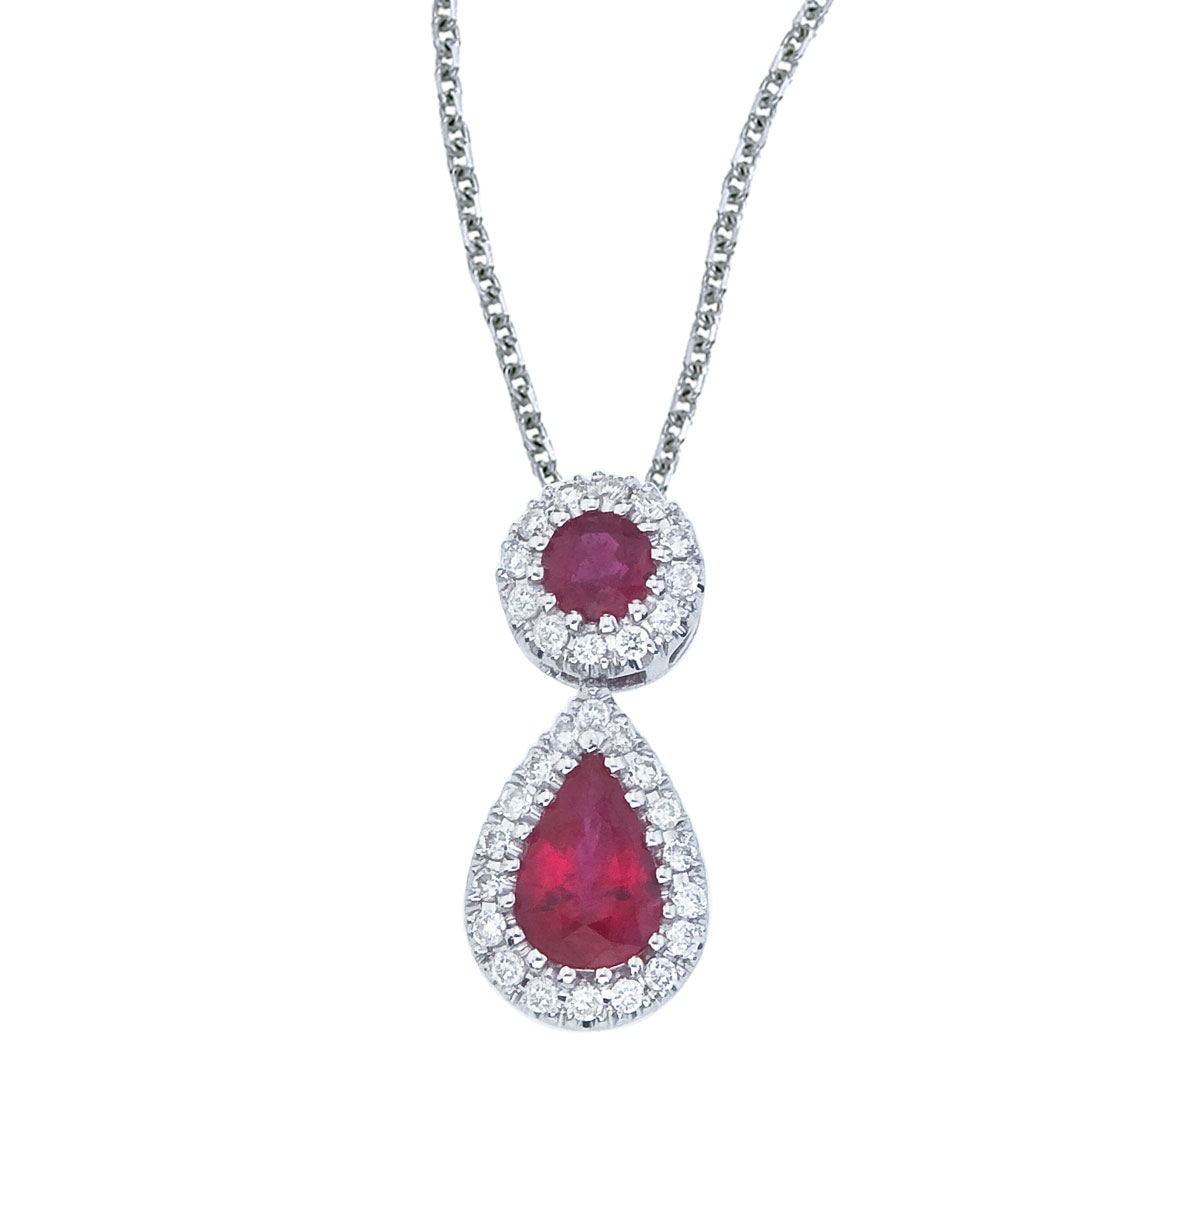 This beautiful 14k white gold pendant features a 6x4 mm ruby dangling from a 2.5 mm round ruby  all surrounded by .12 carats of shimmering diamonds.